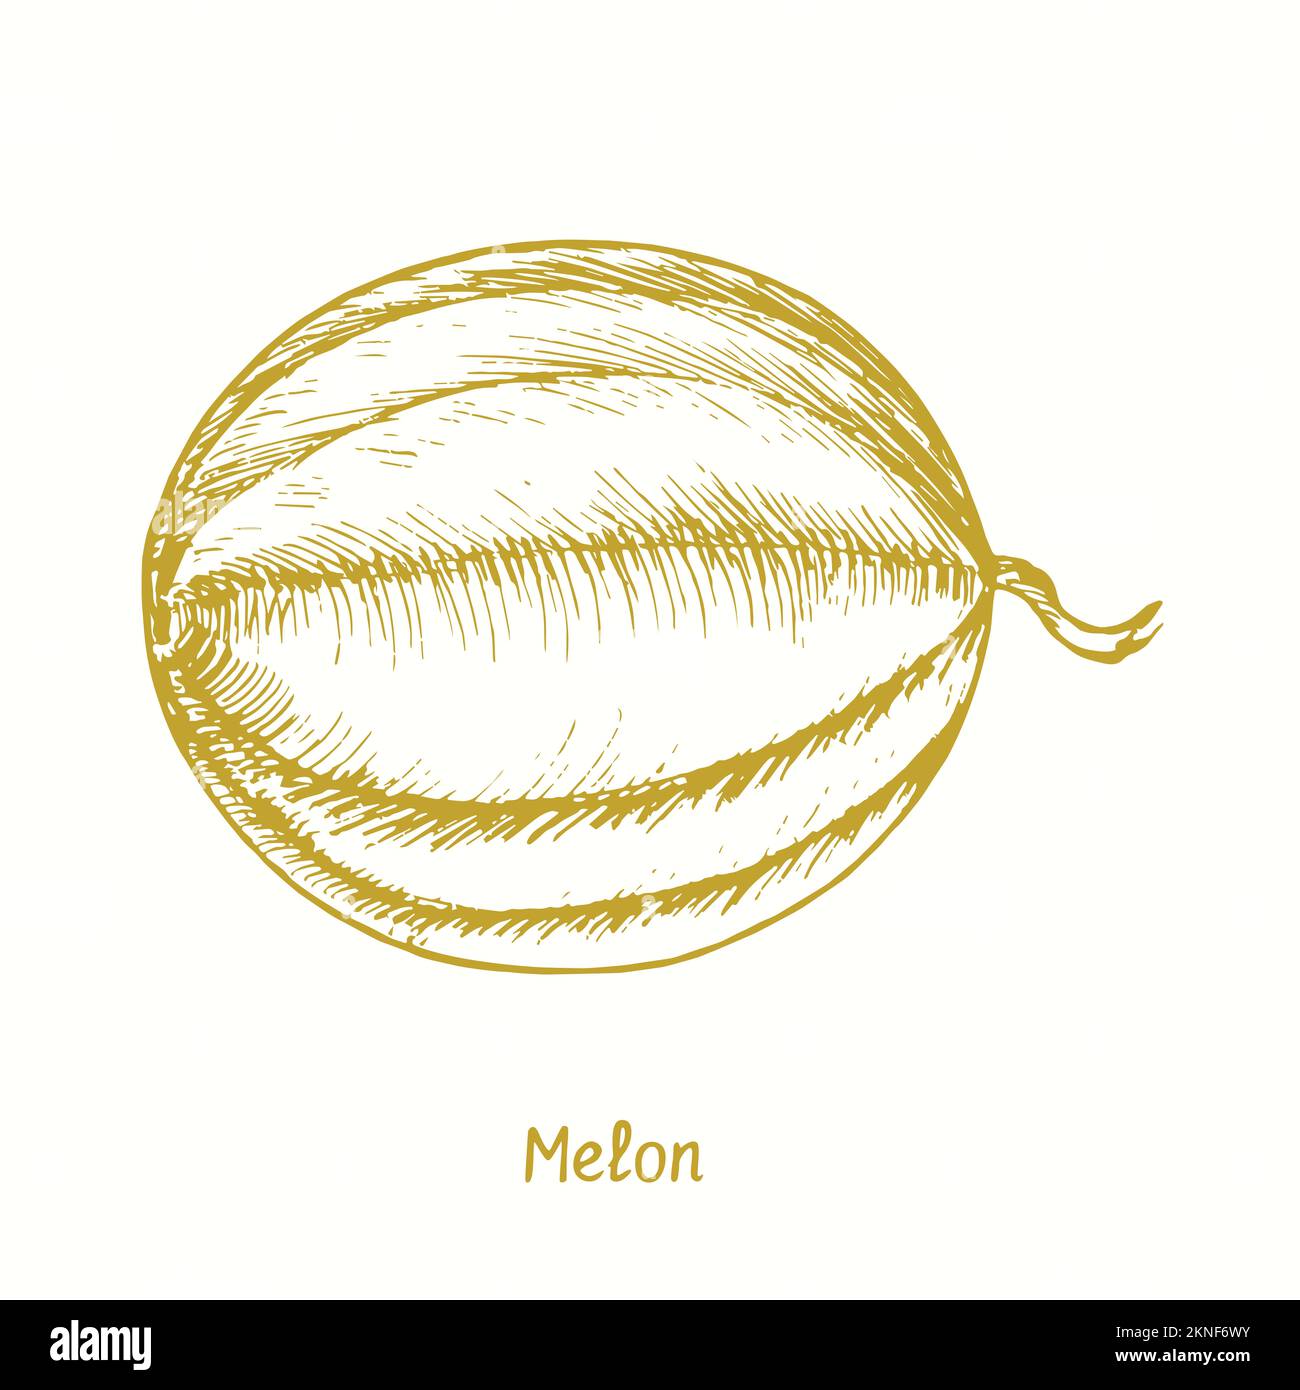 Melon ( Cucurbitaceae ) fruit. Ink yelow doodle drawing in woodcut style Stock Photo